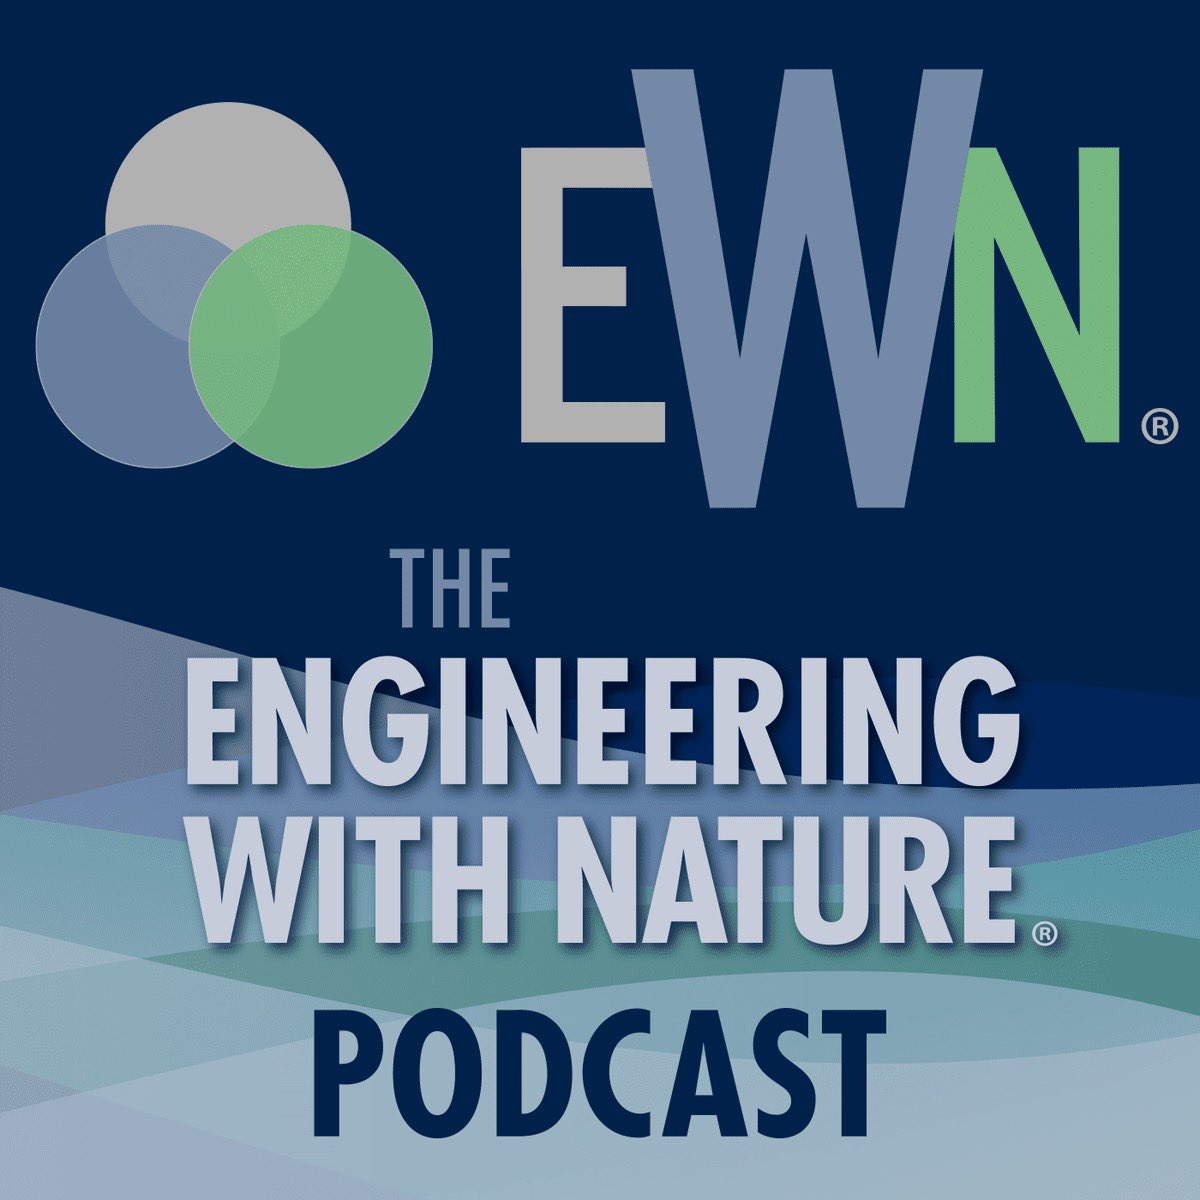 Check out new episodes from two of our affiliates' podcasts: 

The Engineering With Nature Podcast: A Personal Journey To Make NBS “Just Part of the Fabric” In The San Francisco District

@RFuturesPod, @UGA_IRIS: Equitable Engineering: NbS in the Global South